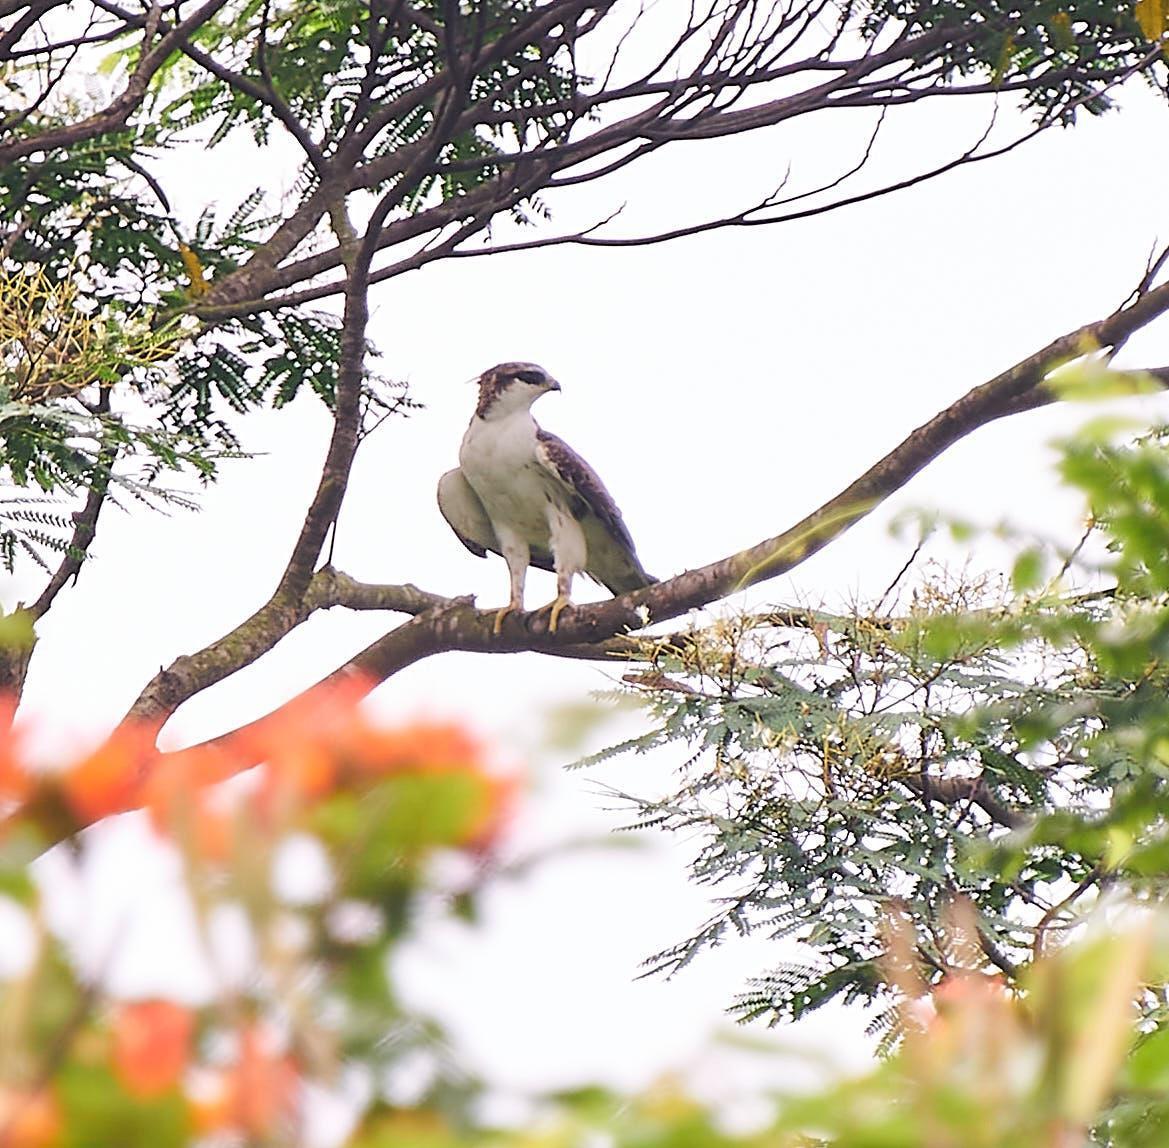 Rufous-bellied Eagle Photo by Steven Cheong